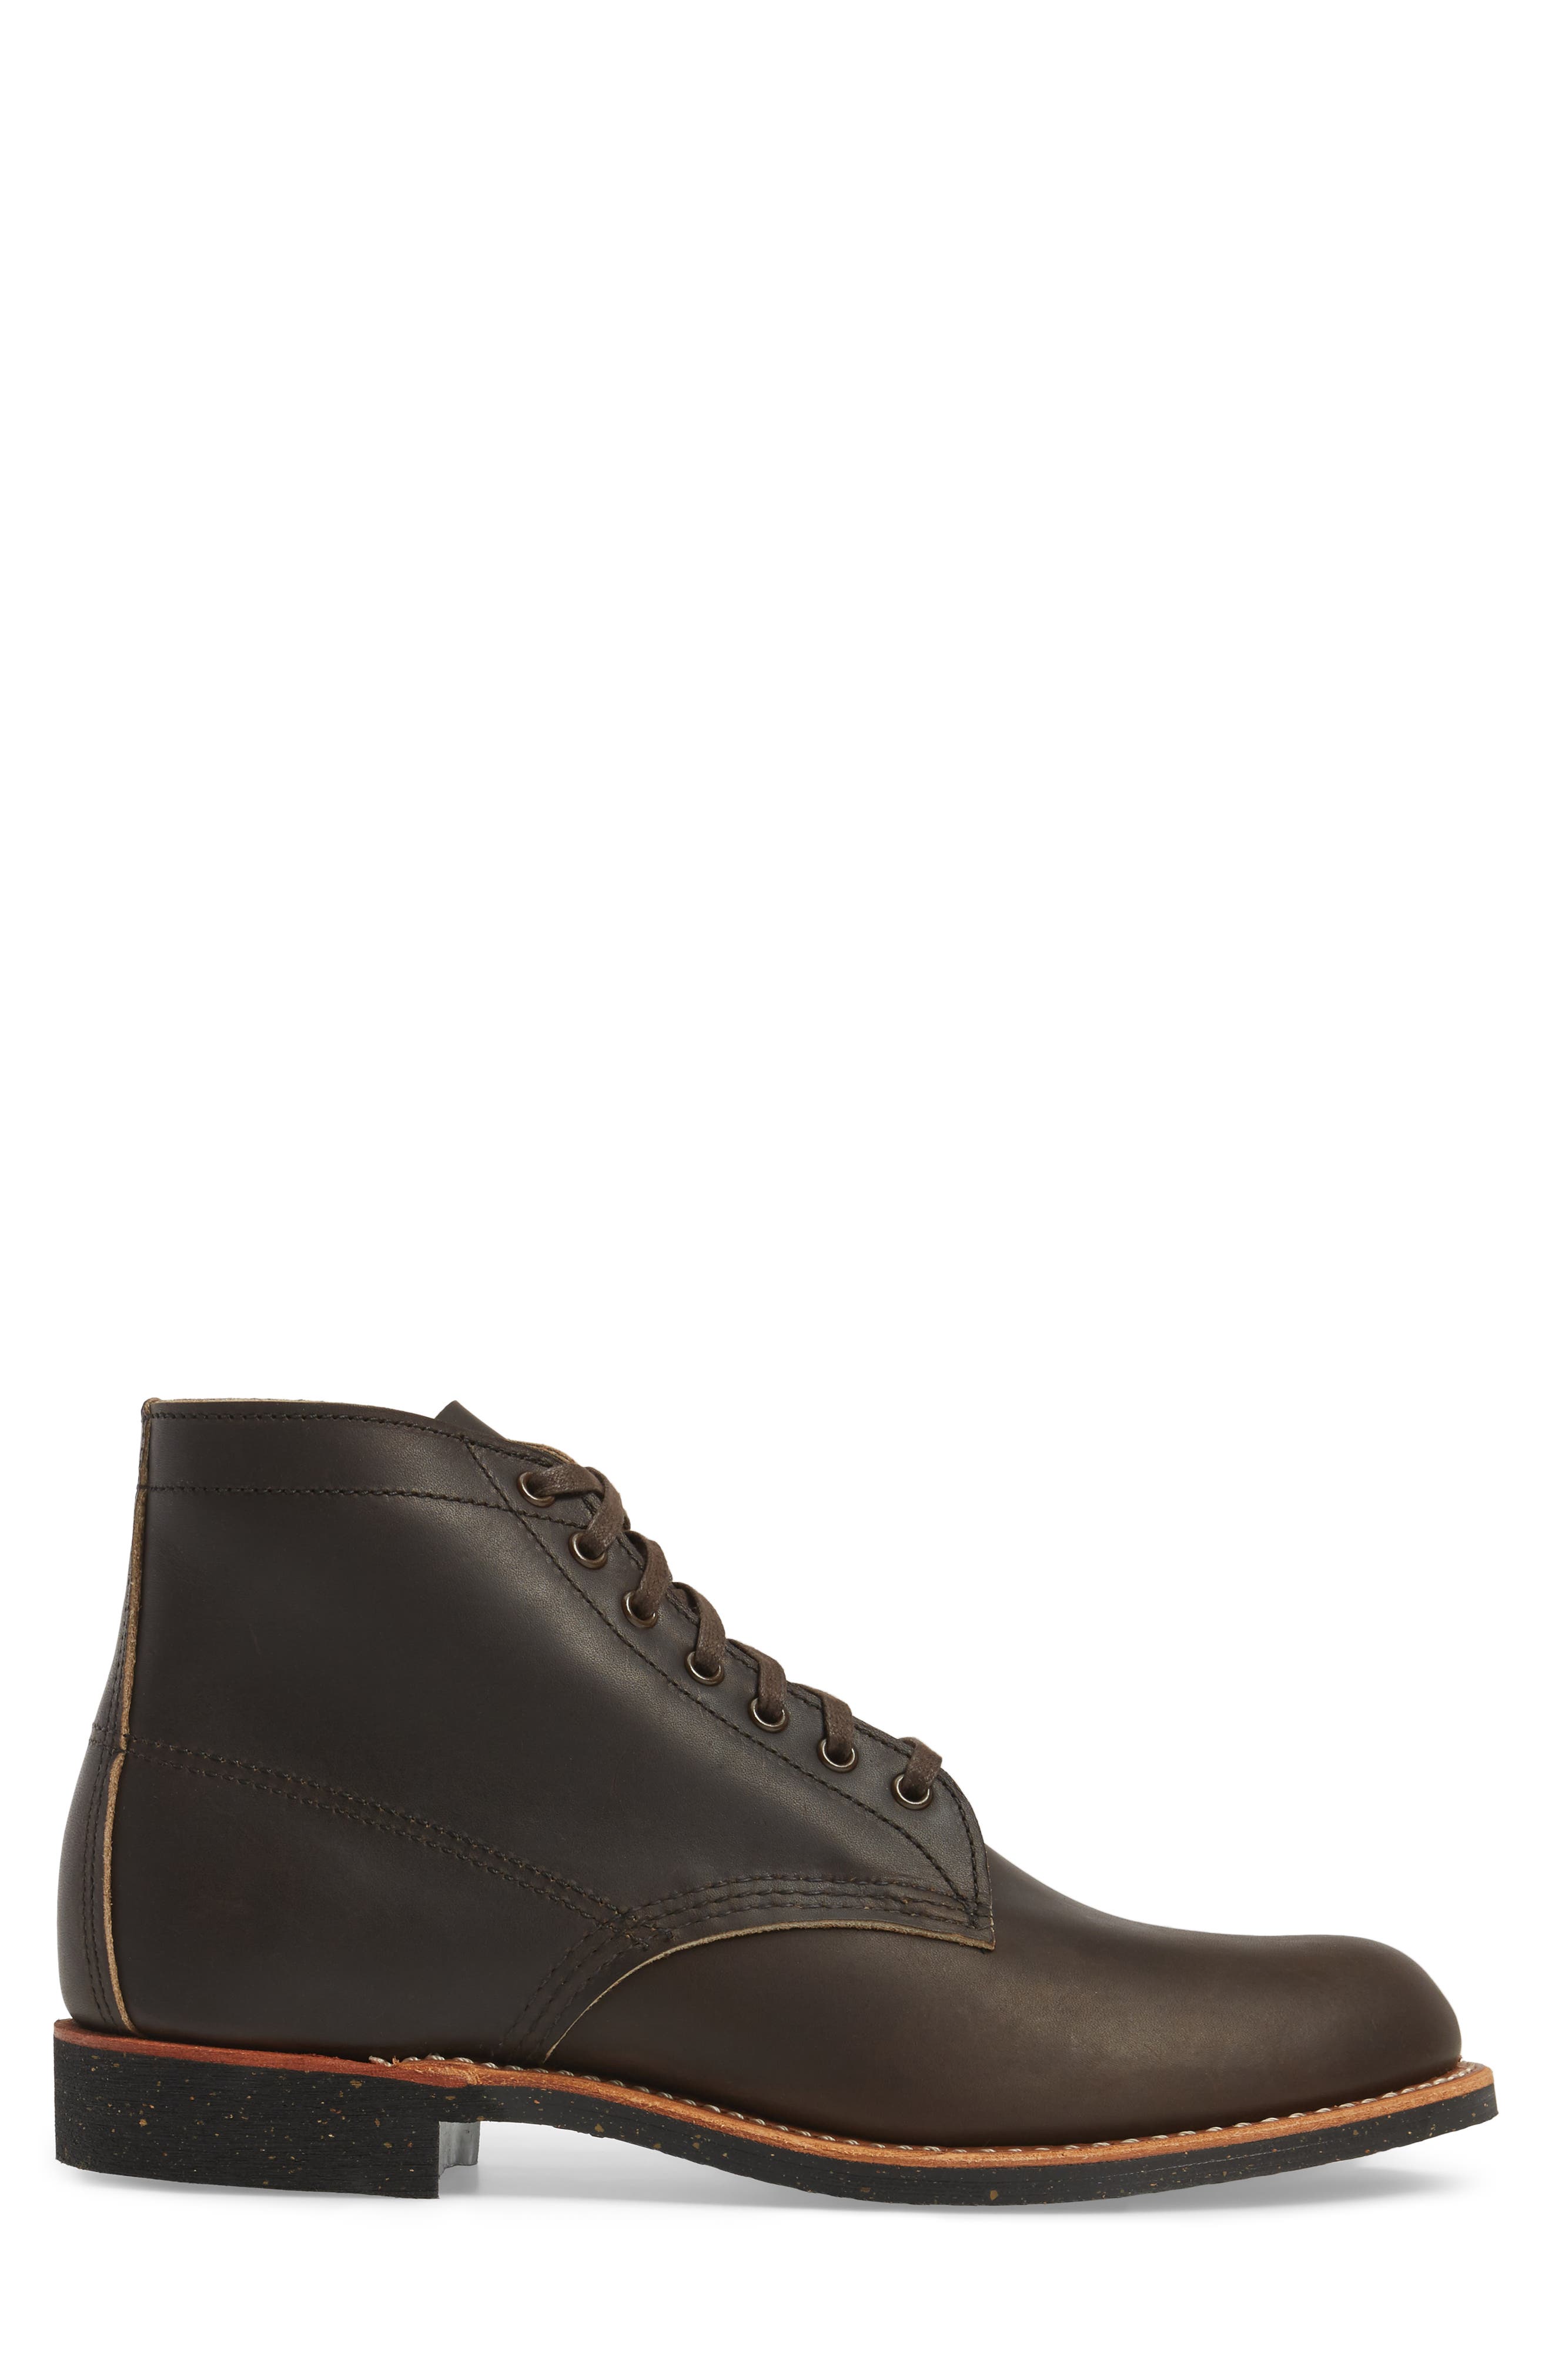 red wing merchant factory seconds